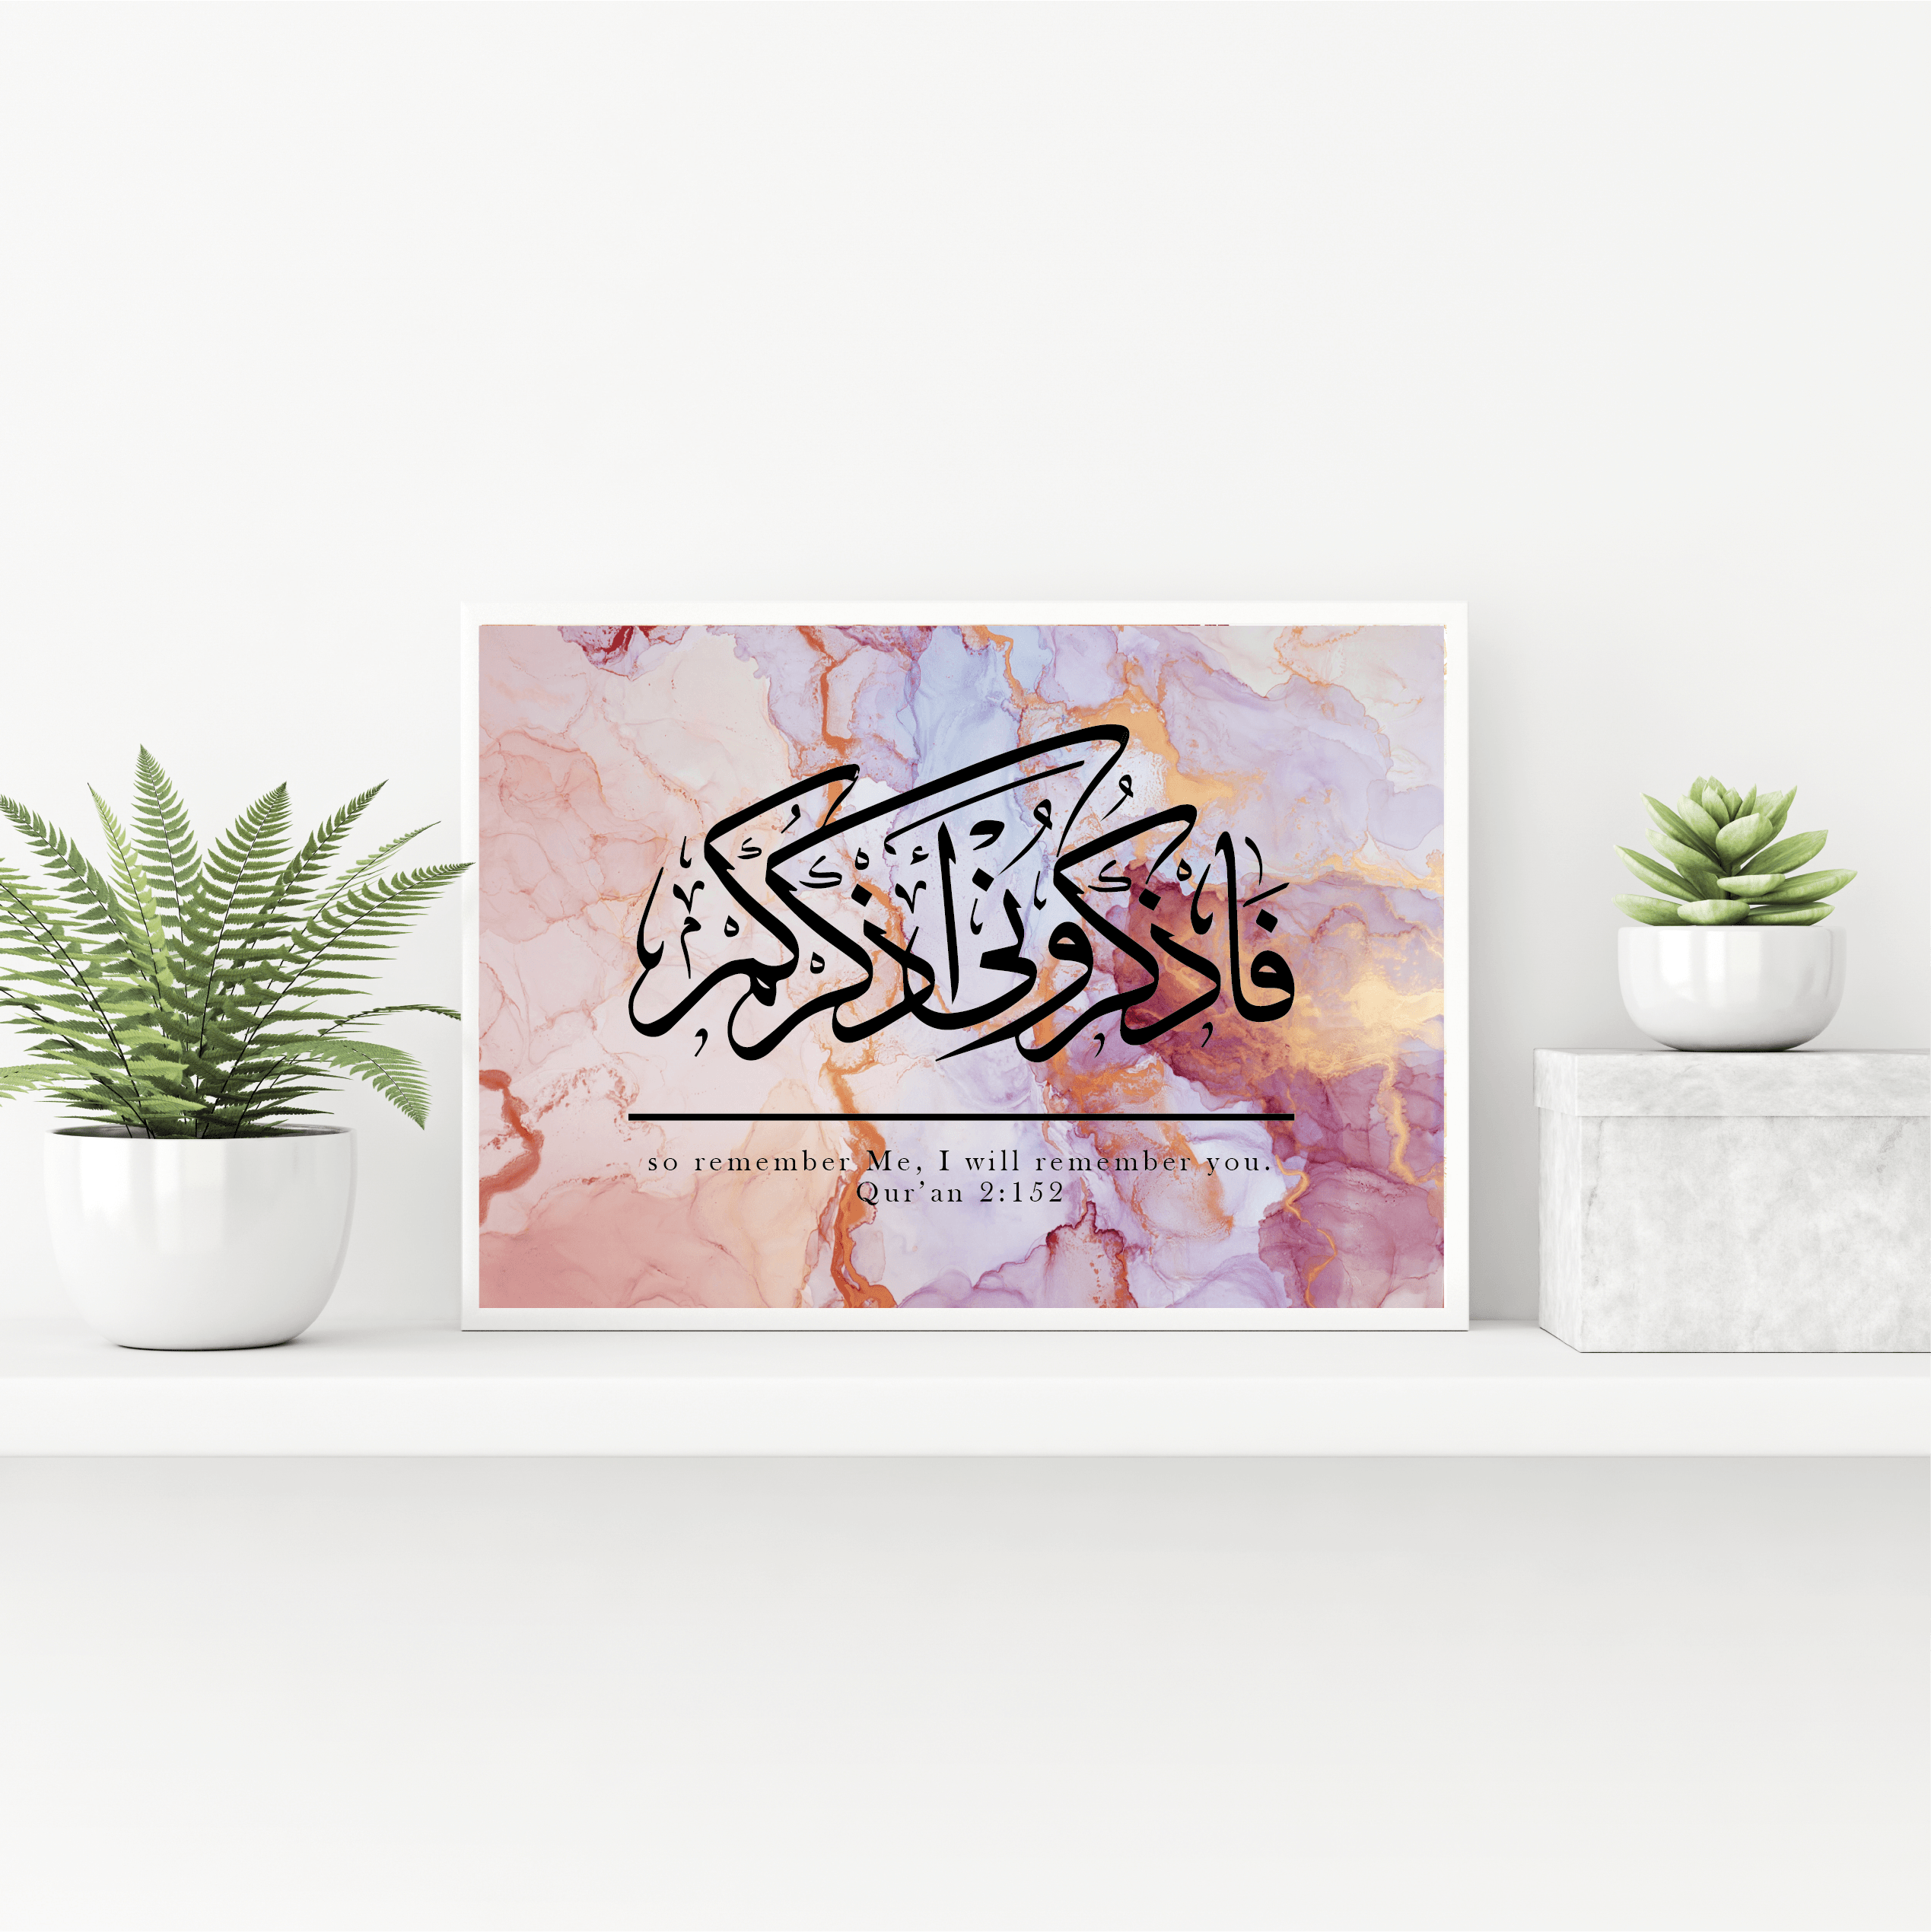 "Remember Me And I Will Remember You", Qur'an 2:152 Quote | Islamic Wall Art Print | Islamic Poster | Available In Different Colours - Peaceful Arts